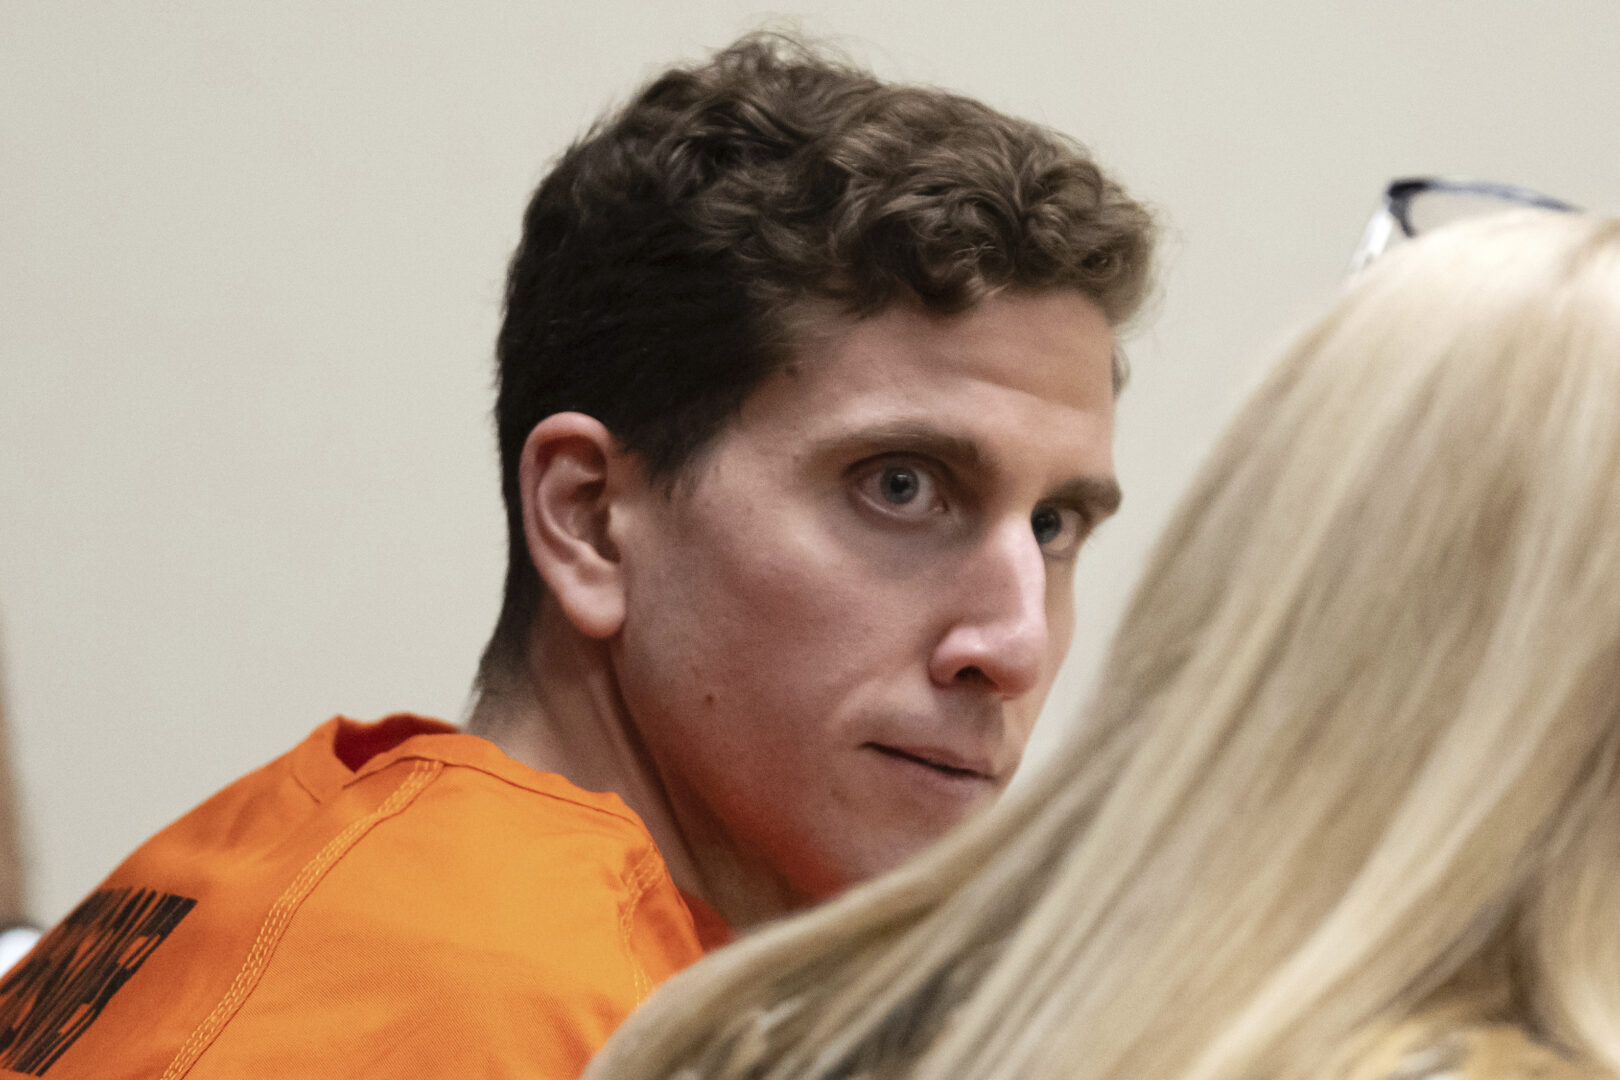 Bryan Kohberger, left, who is accused of killing four University of Idaho students in November 2022, looks toward his attorney, public defender Anne Taylor, right, during a hearing in Latah County District Court, Thursday, Jan. 5, 2023, in Moscow, Idaho. 